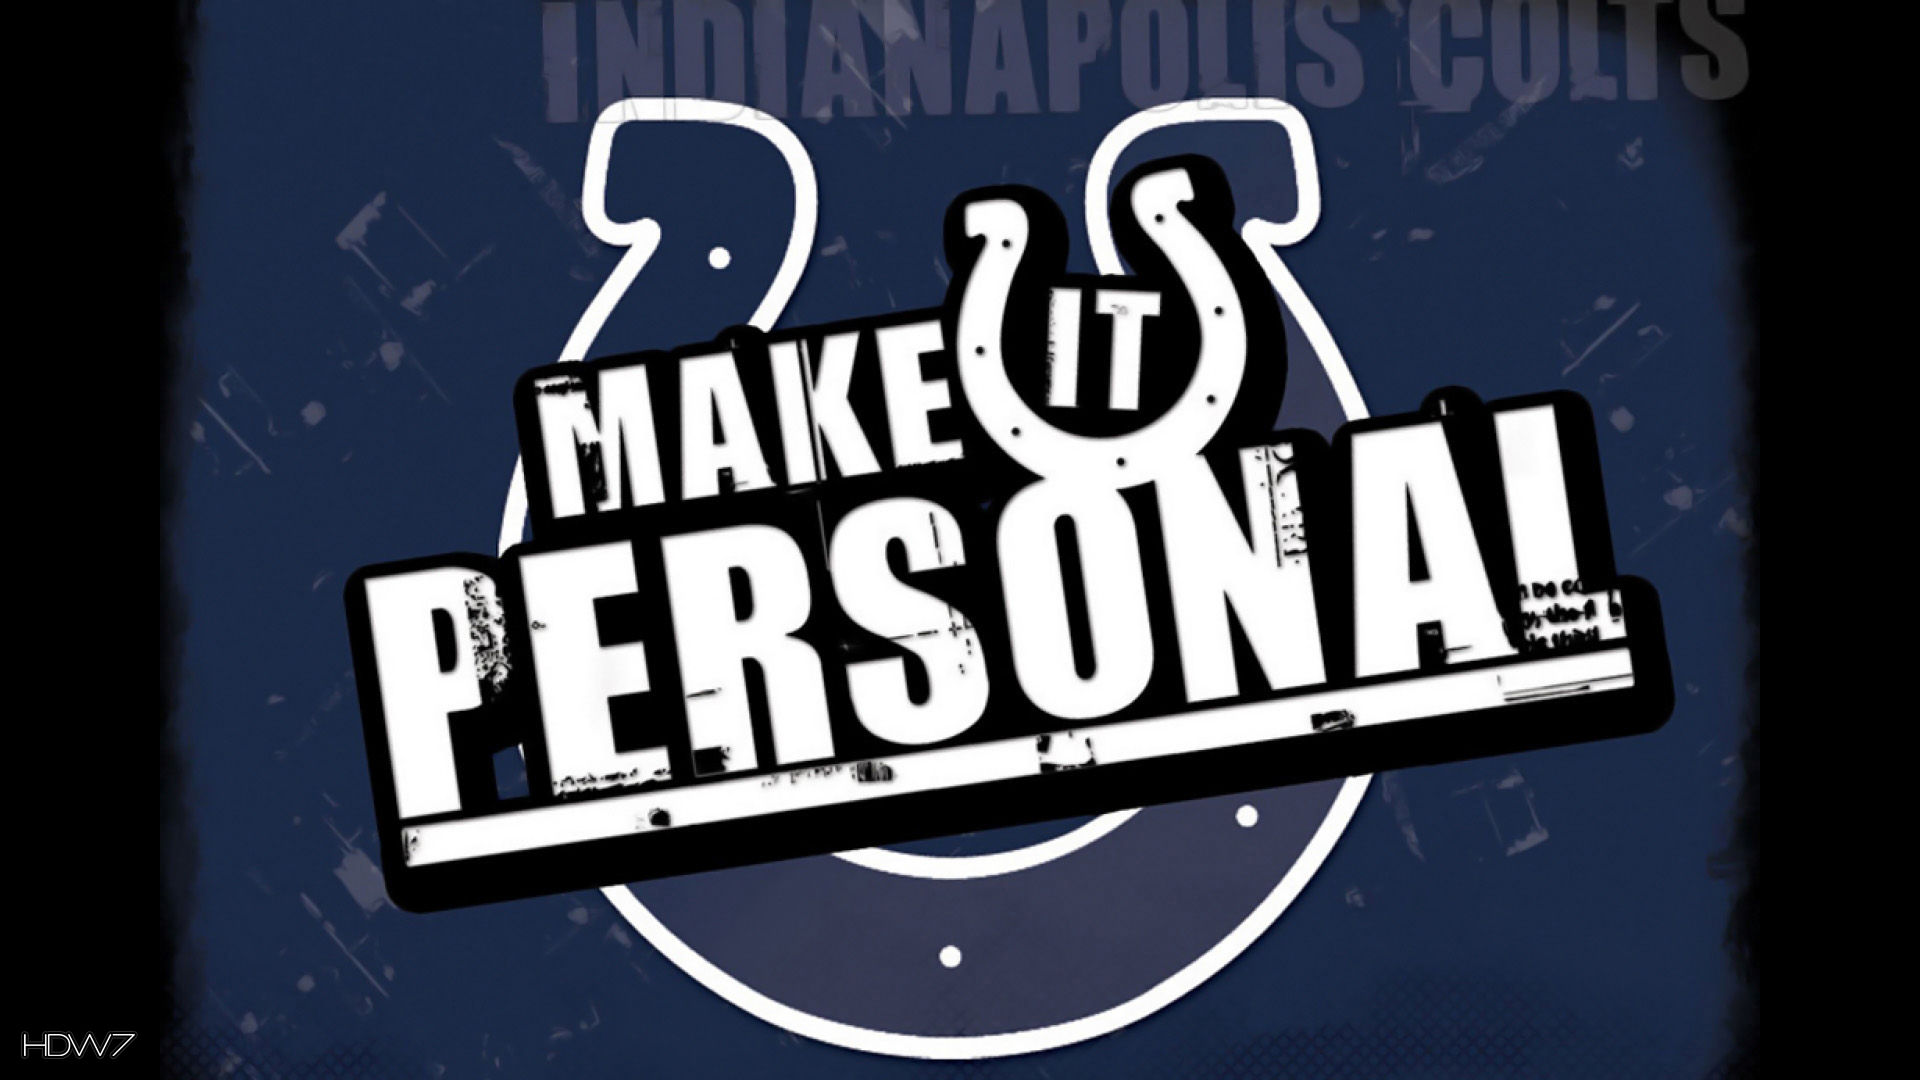 Colts Indianapolis Make It Personal - Colts Make It Personal - HD Wallpaper 